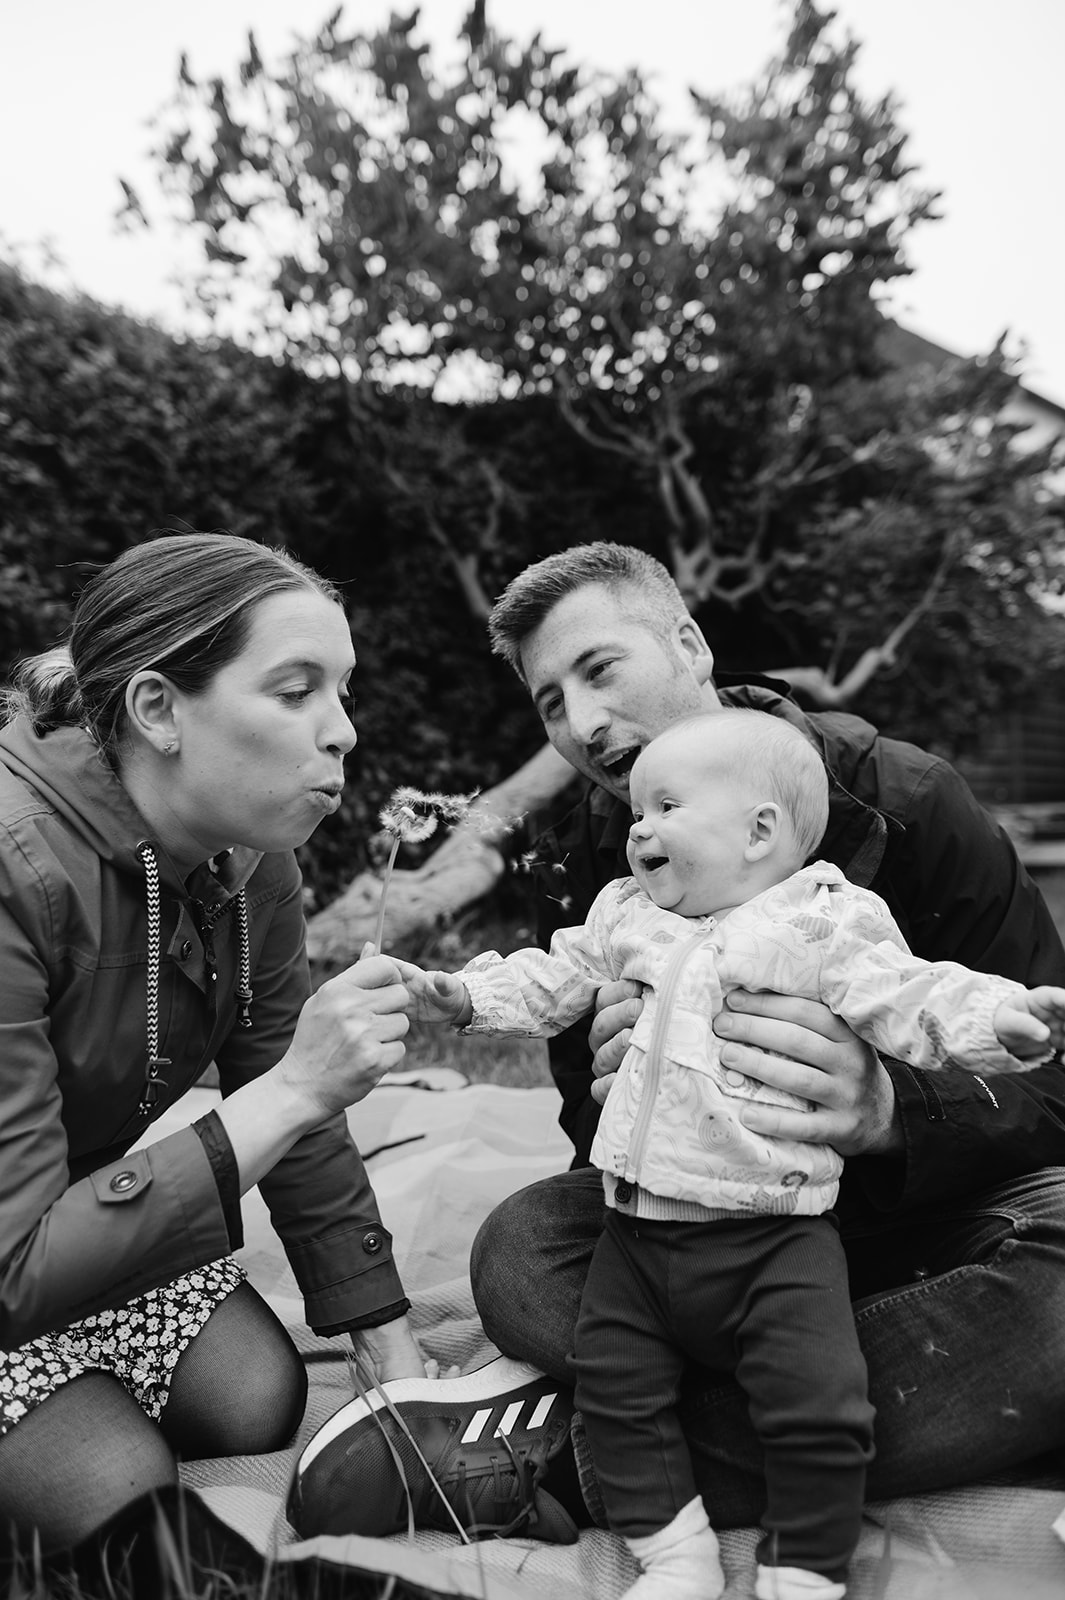 parents and baby boy on a picnic rug in the garden blowing dandelion seeds